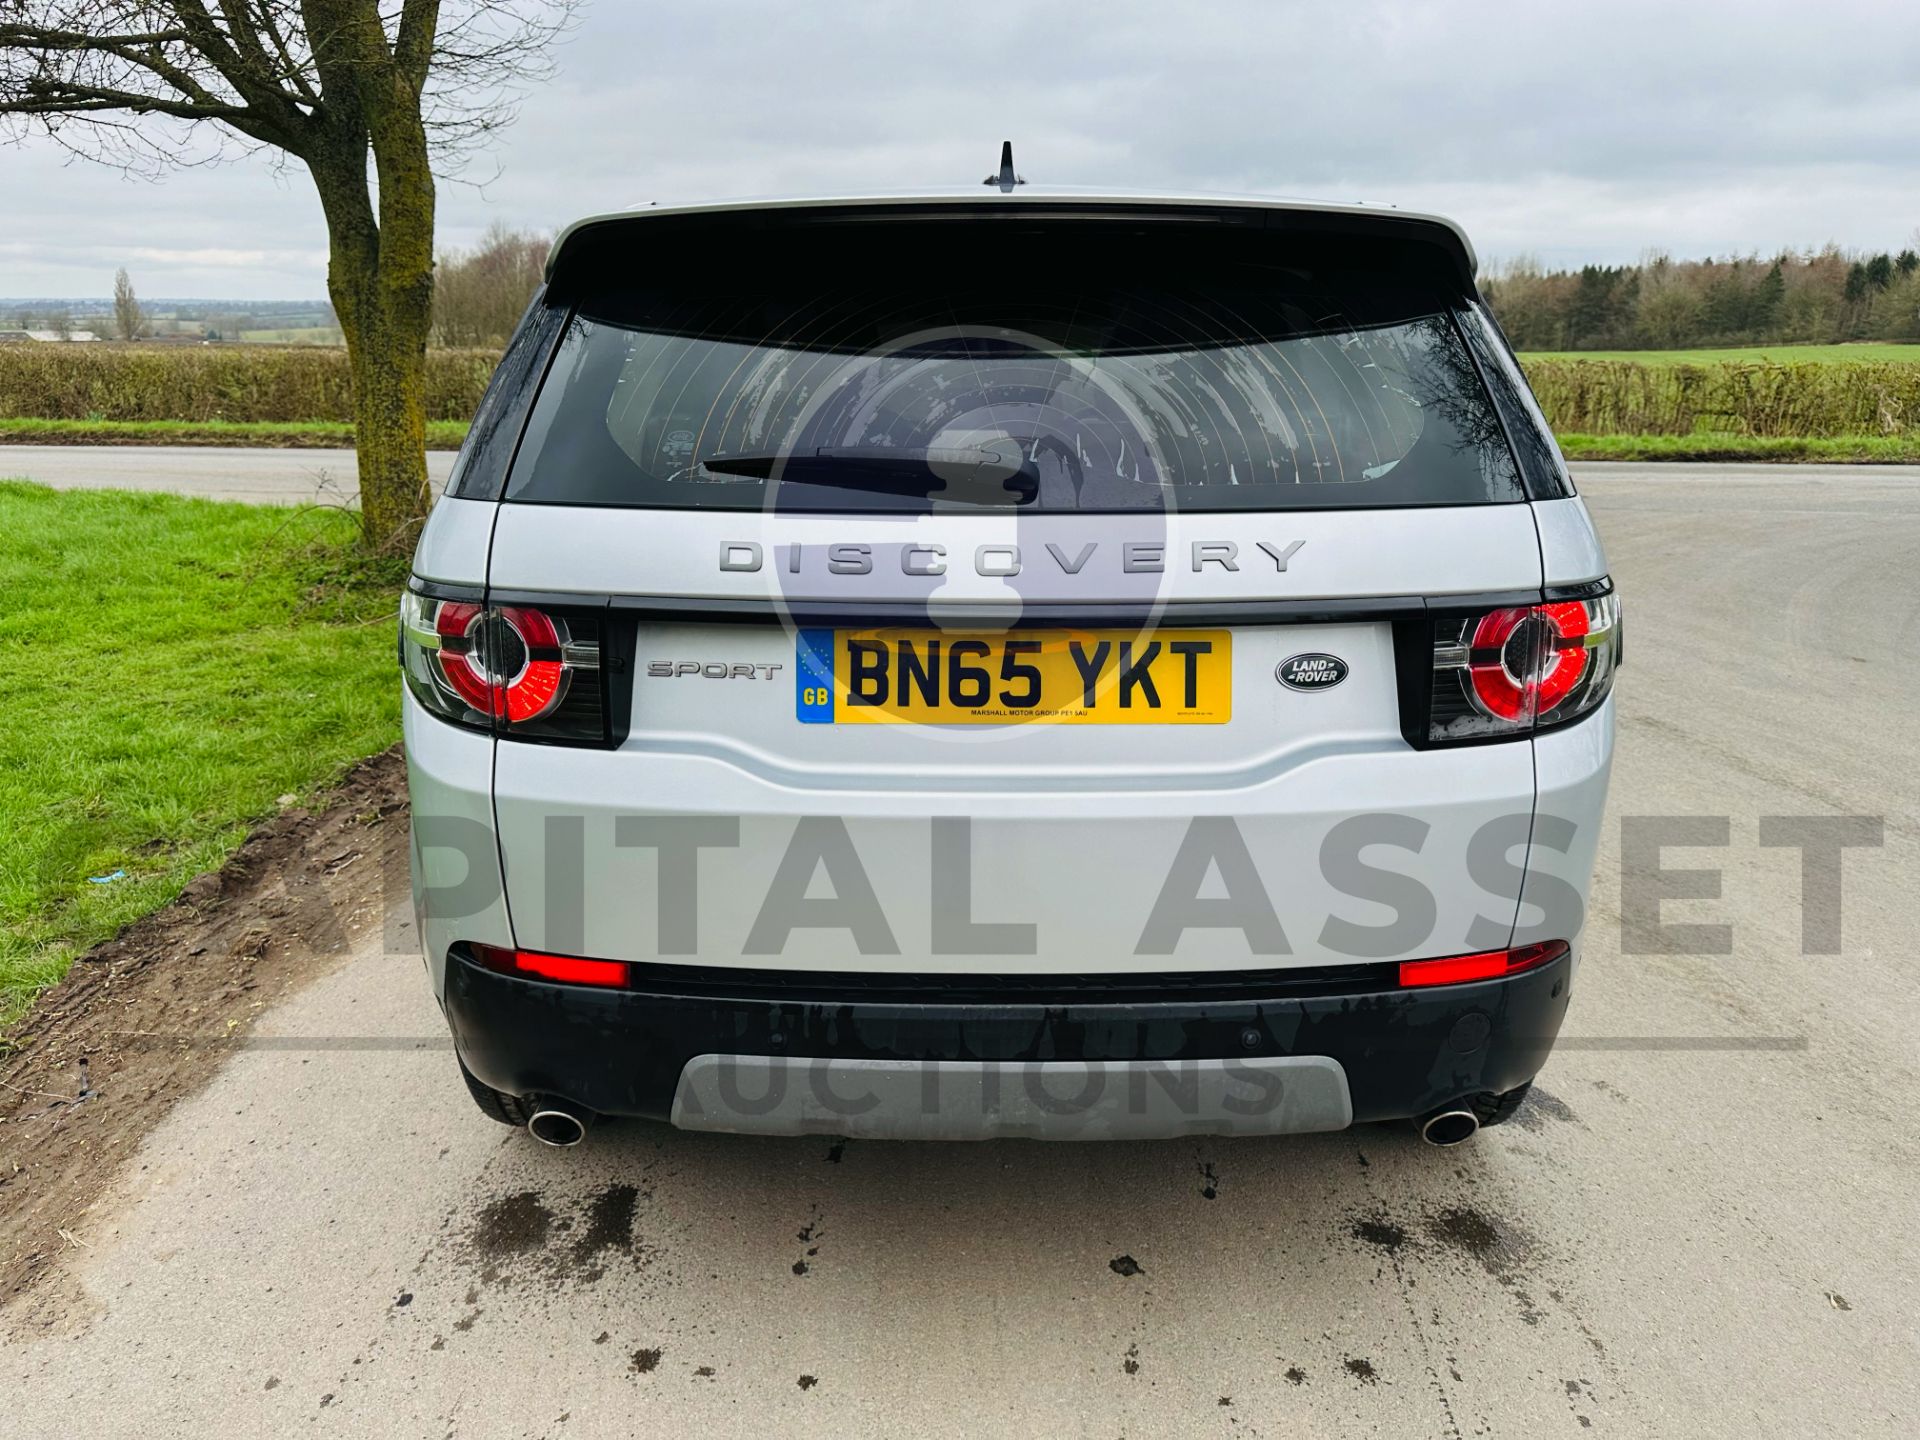 LAND ROVER DISCOVERY SPORT *SE TECH* 7 SEATER SUV (65 REG - EURO 6) 2.0 TD4 - AUTOMATIC - Image 8 of 38